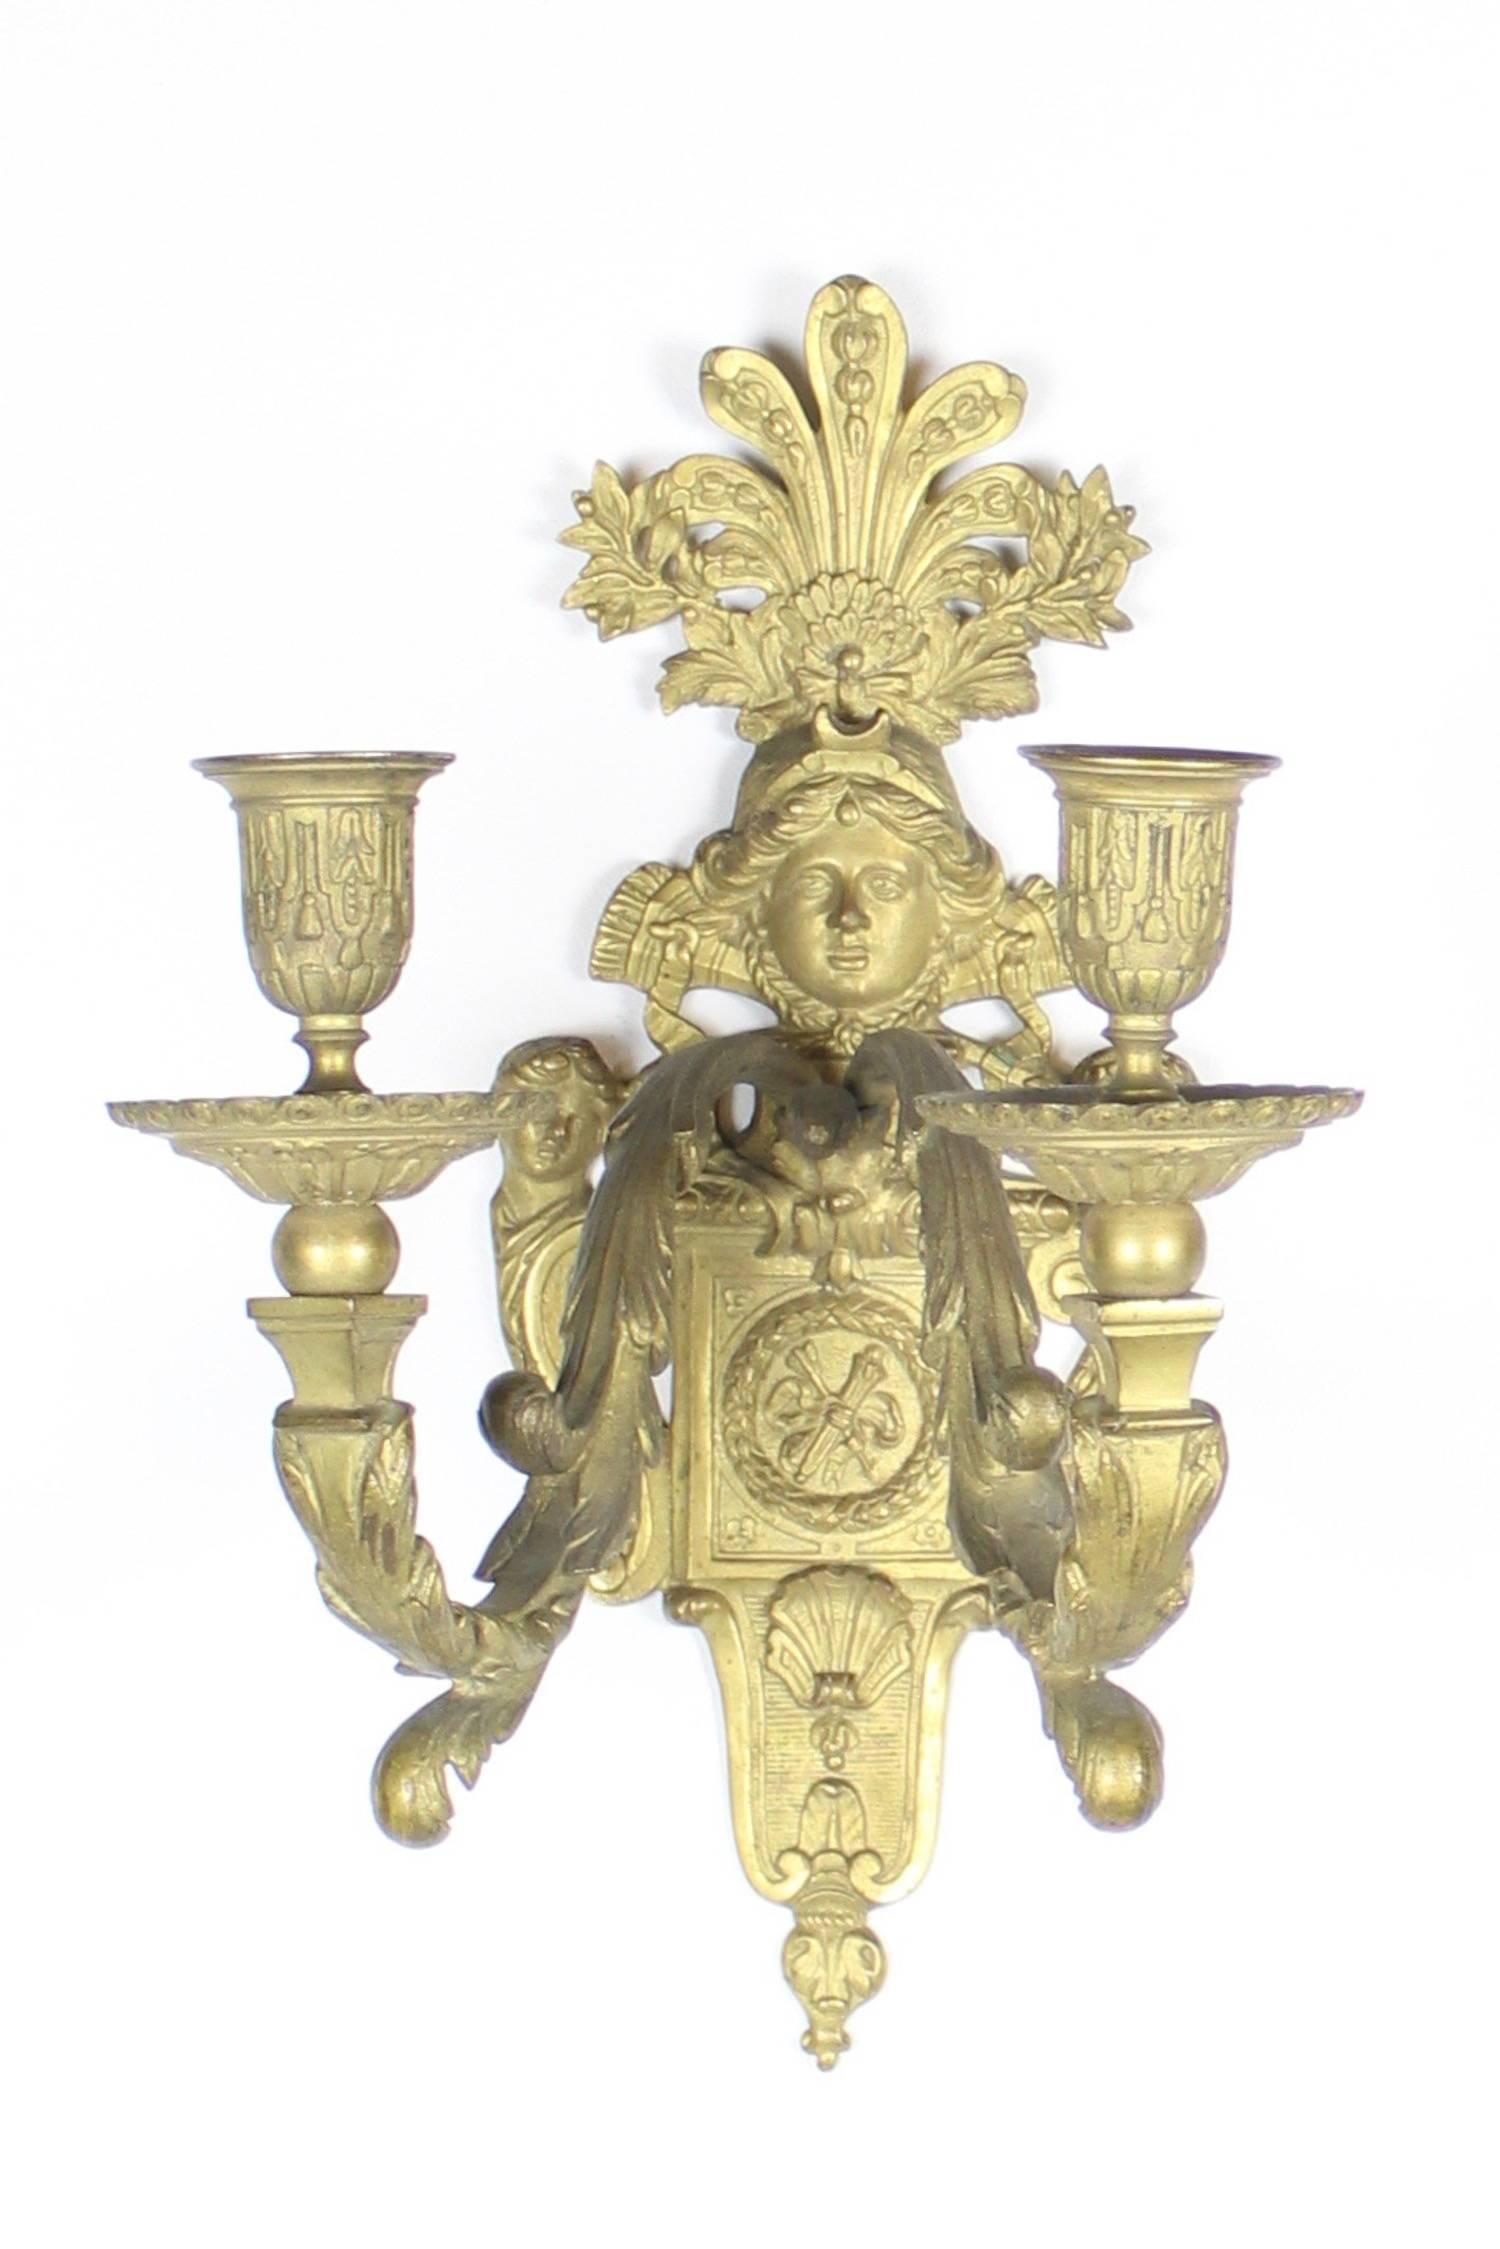 An absolutely superb pair of double-arm figural sconces done in the Beaux-Arts style just after the turn-of-the century, circa 1910. Depicting a central female figure surrounded by grand decorative motifs. Each sconce has two candle arms. These